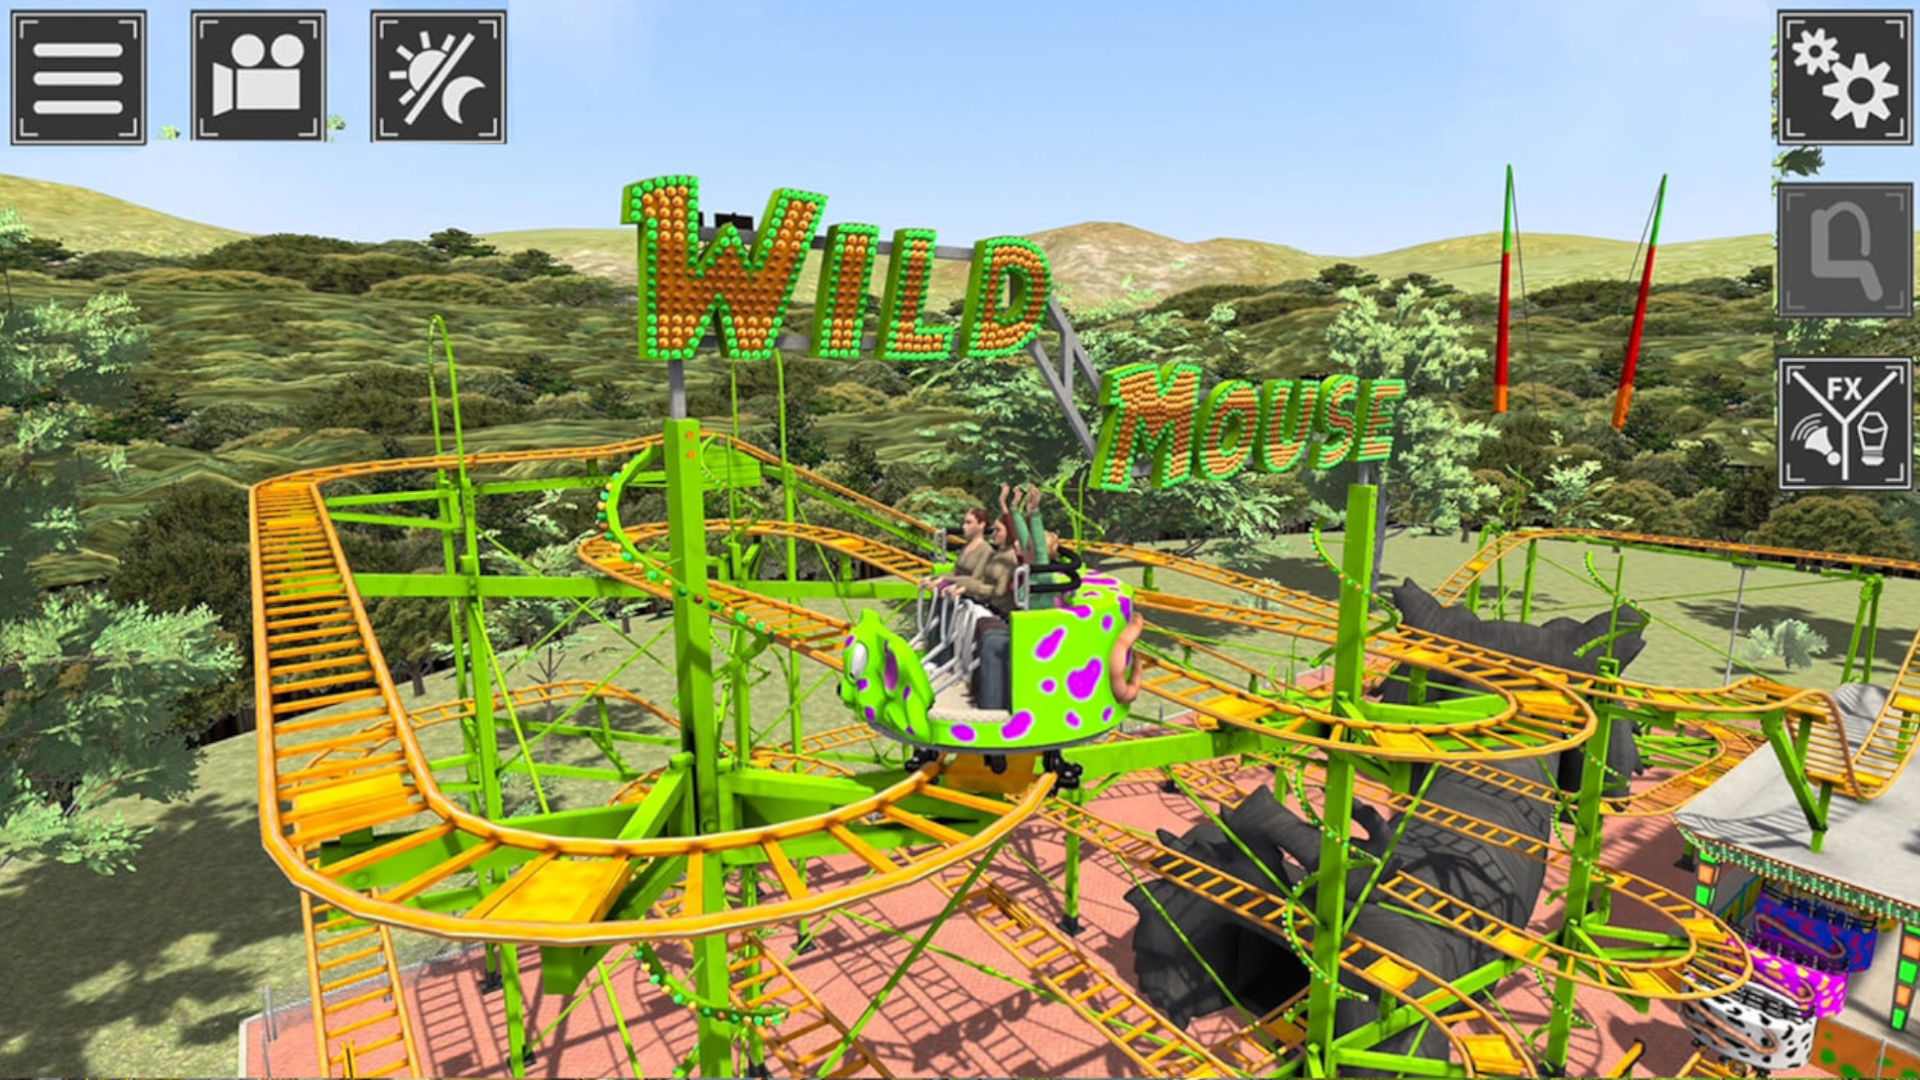 The lost legacy of RollerCoaster Tycoon